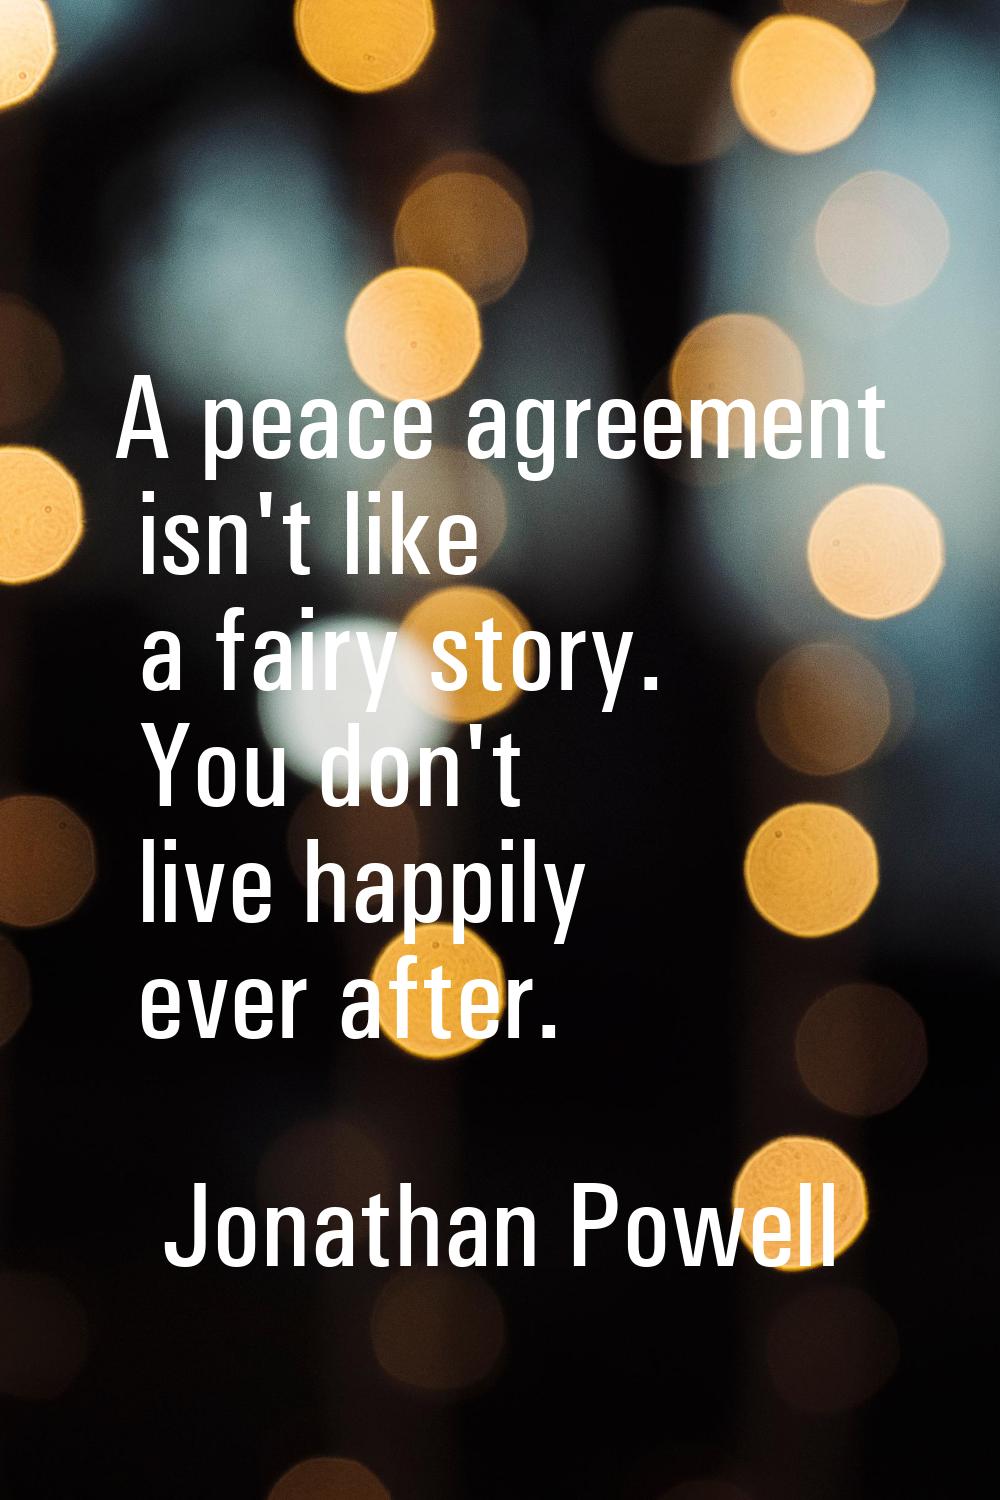 A peace agreement isn't like a fairy story. You don't live happily ever after.